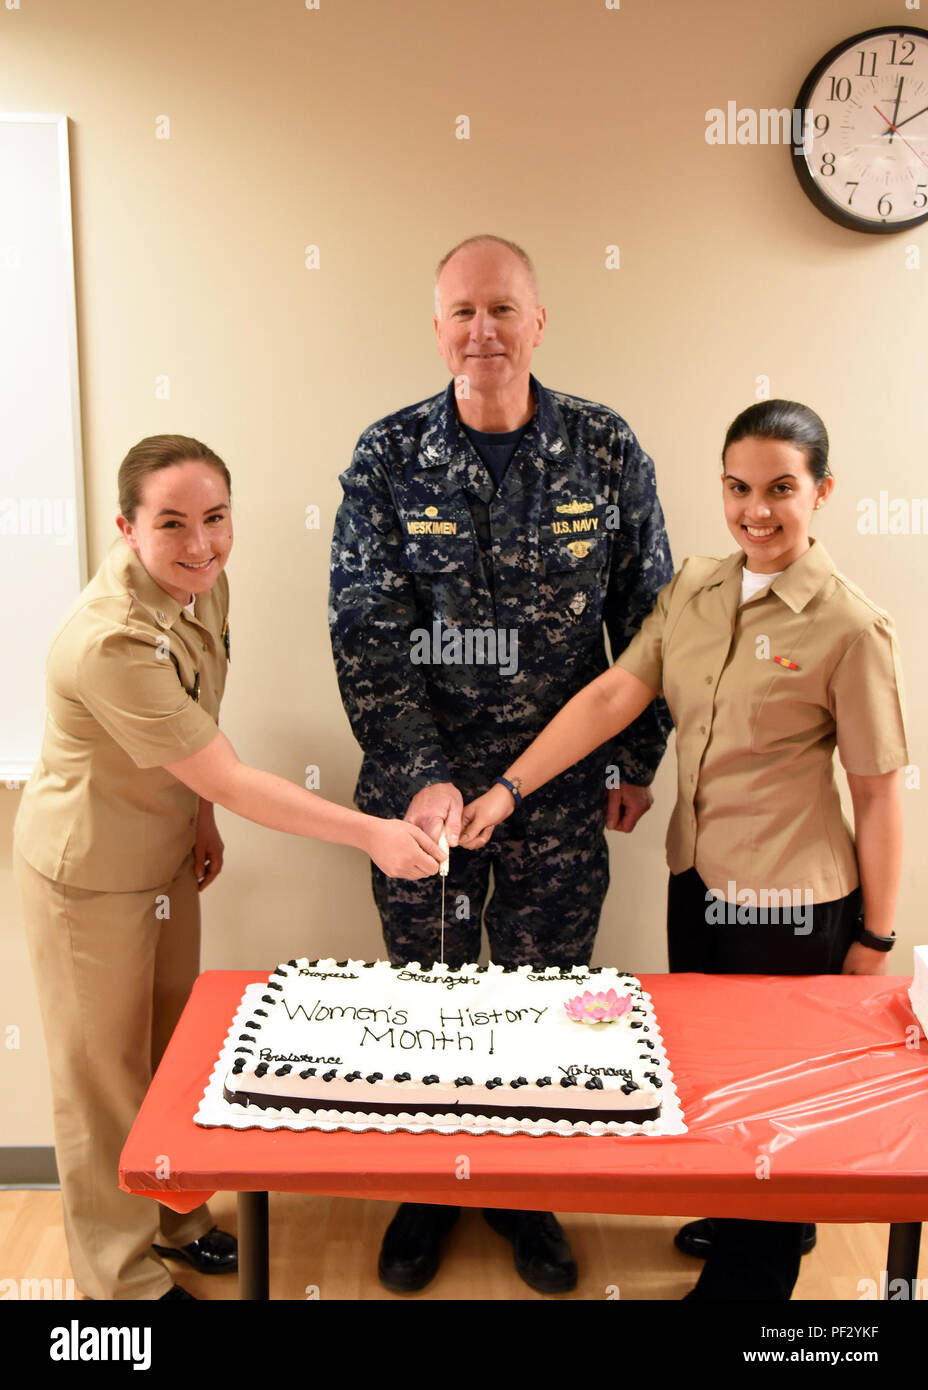 Hobart irony highlight GREAT LAKES, Ill. (Mar. 21, 2018) Capt. Mark Meskimen, commanding officer  of Training Support Center Great Lakes, Lt. Katy T. Bock, student  management officer and senior watch officer, and Electricians Mate Fireman